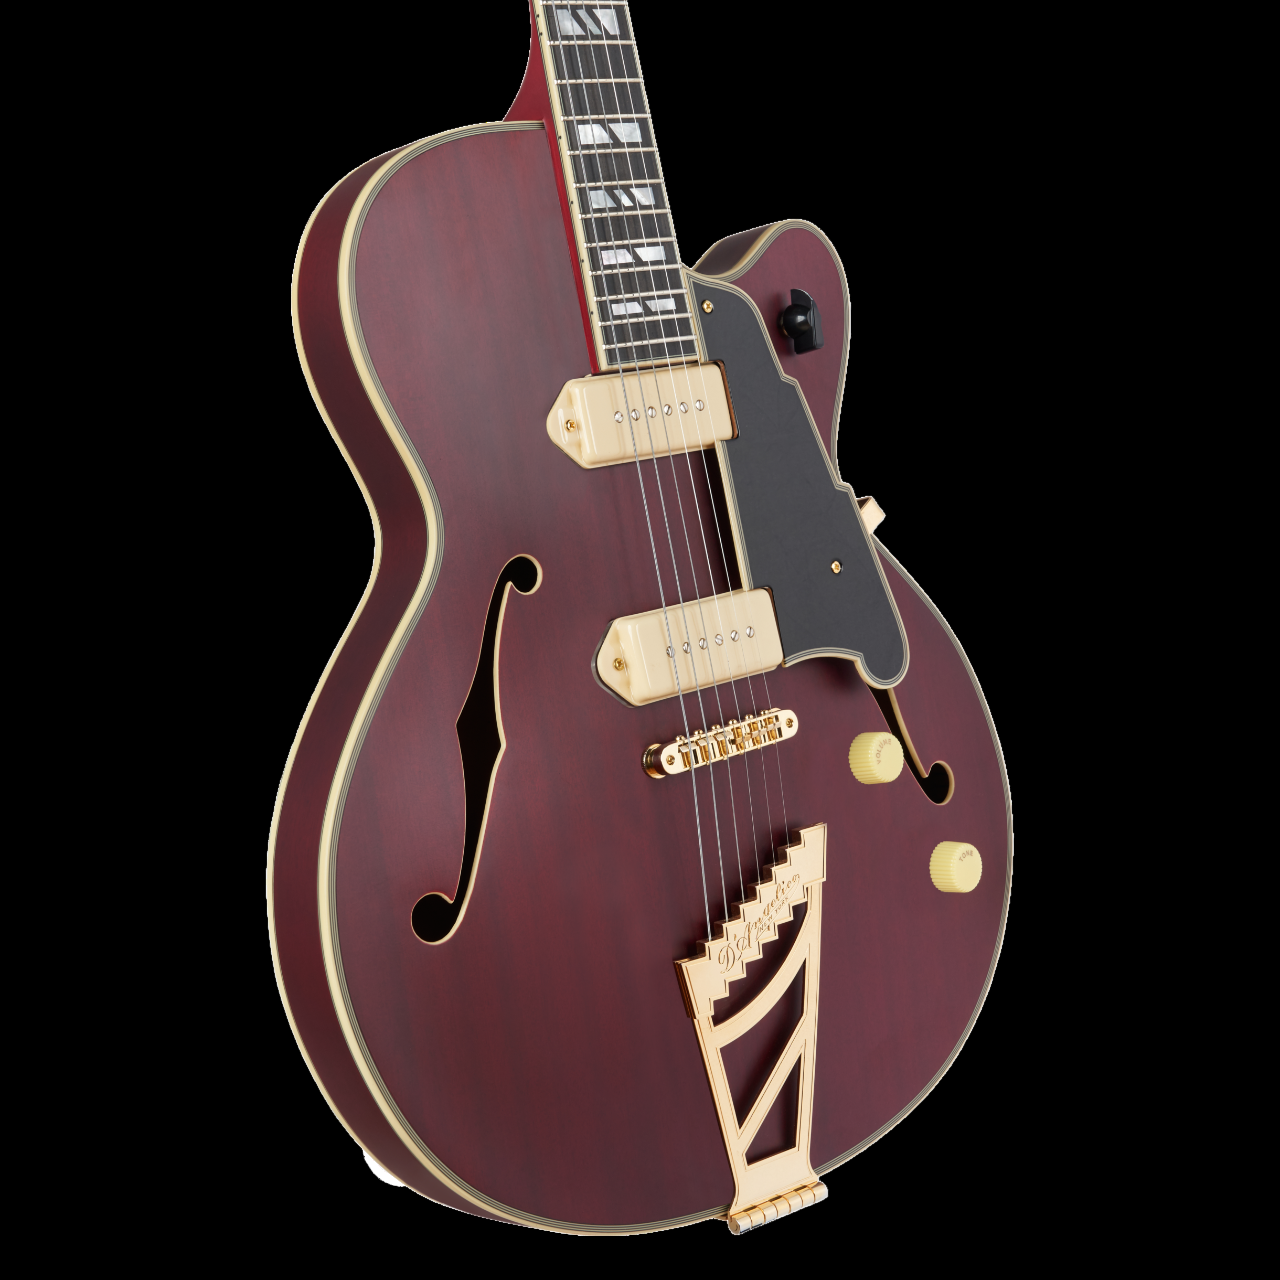 D'Angelico Deluxe 59 Satin Trans Wine Electric Guitar